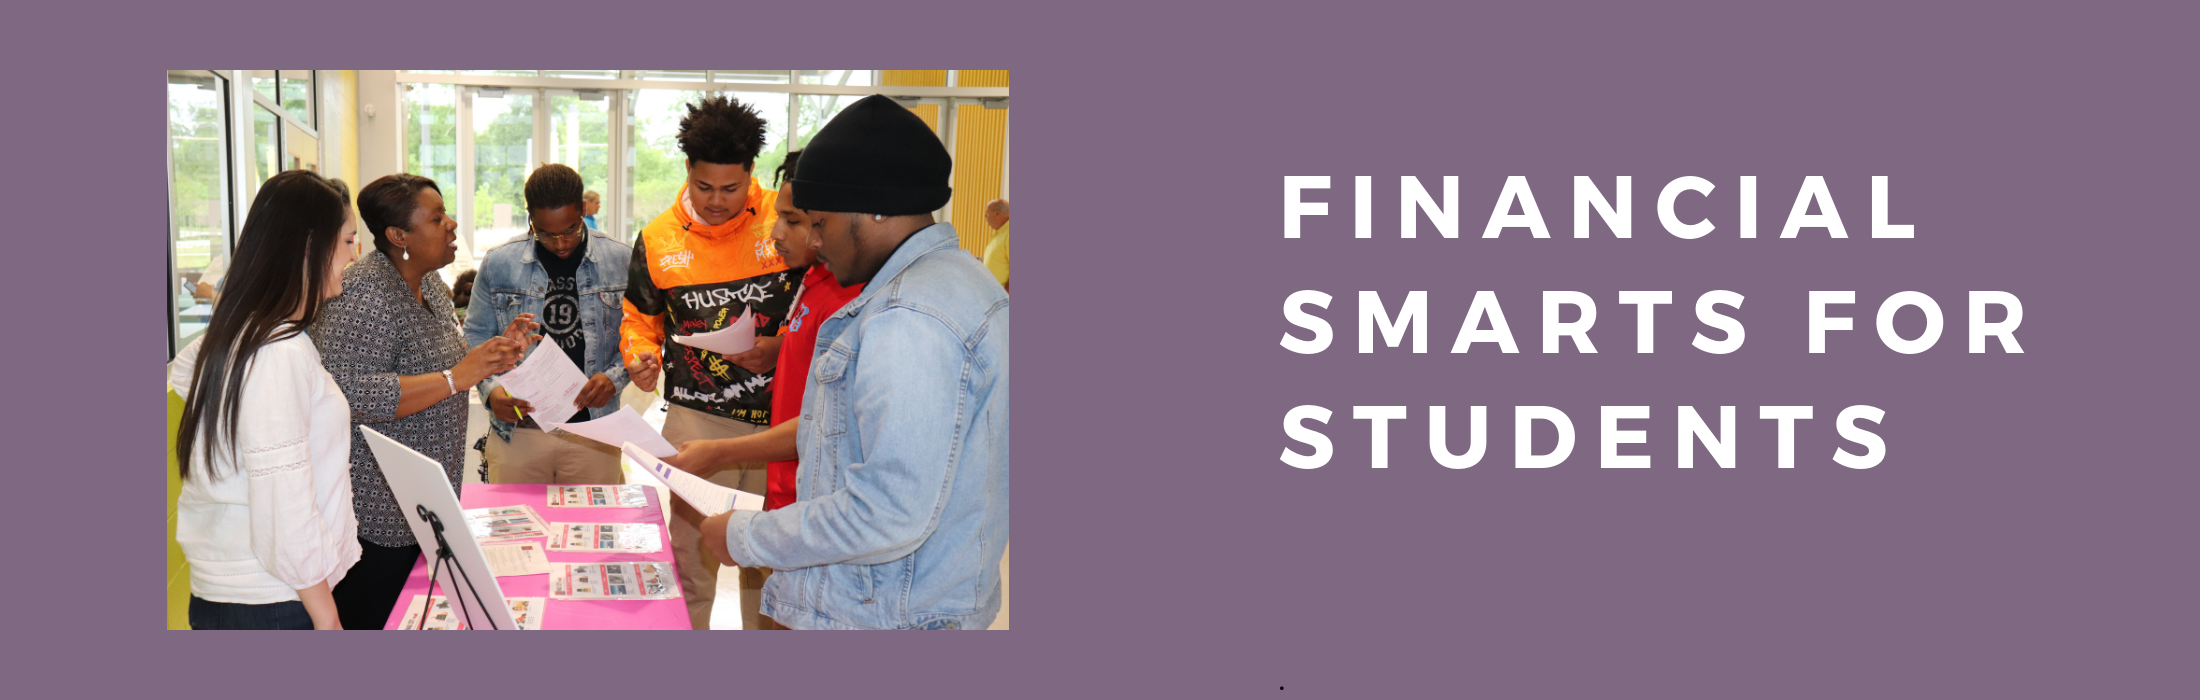 Financial Smarts for Students – guys